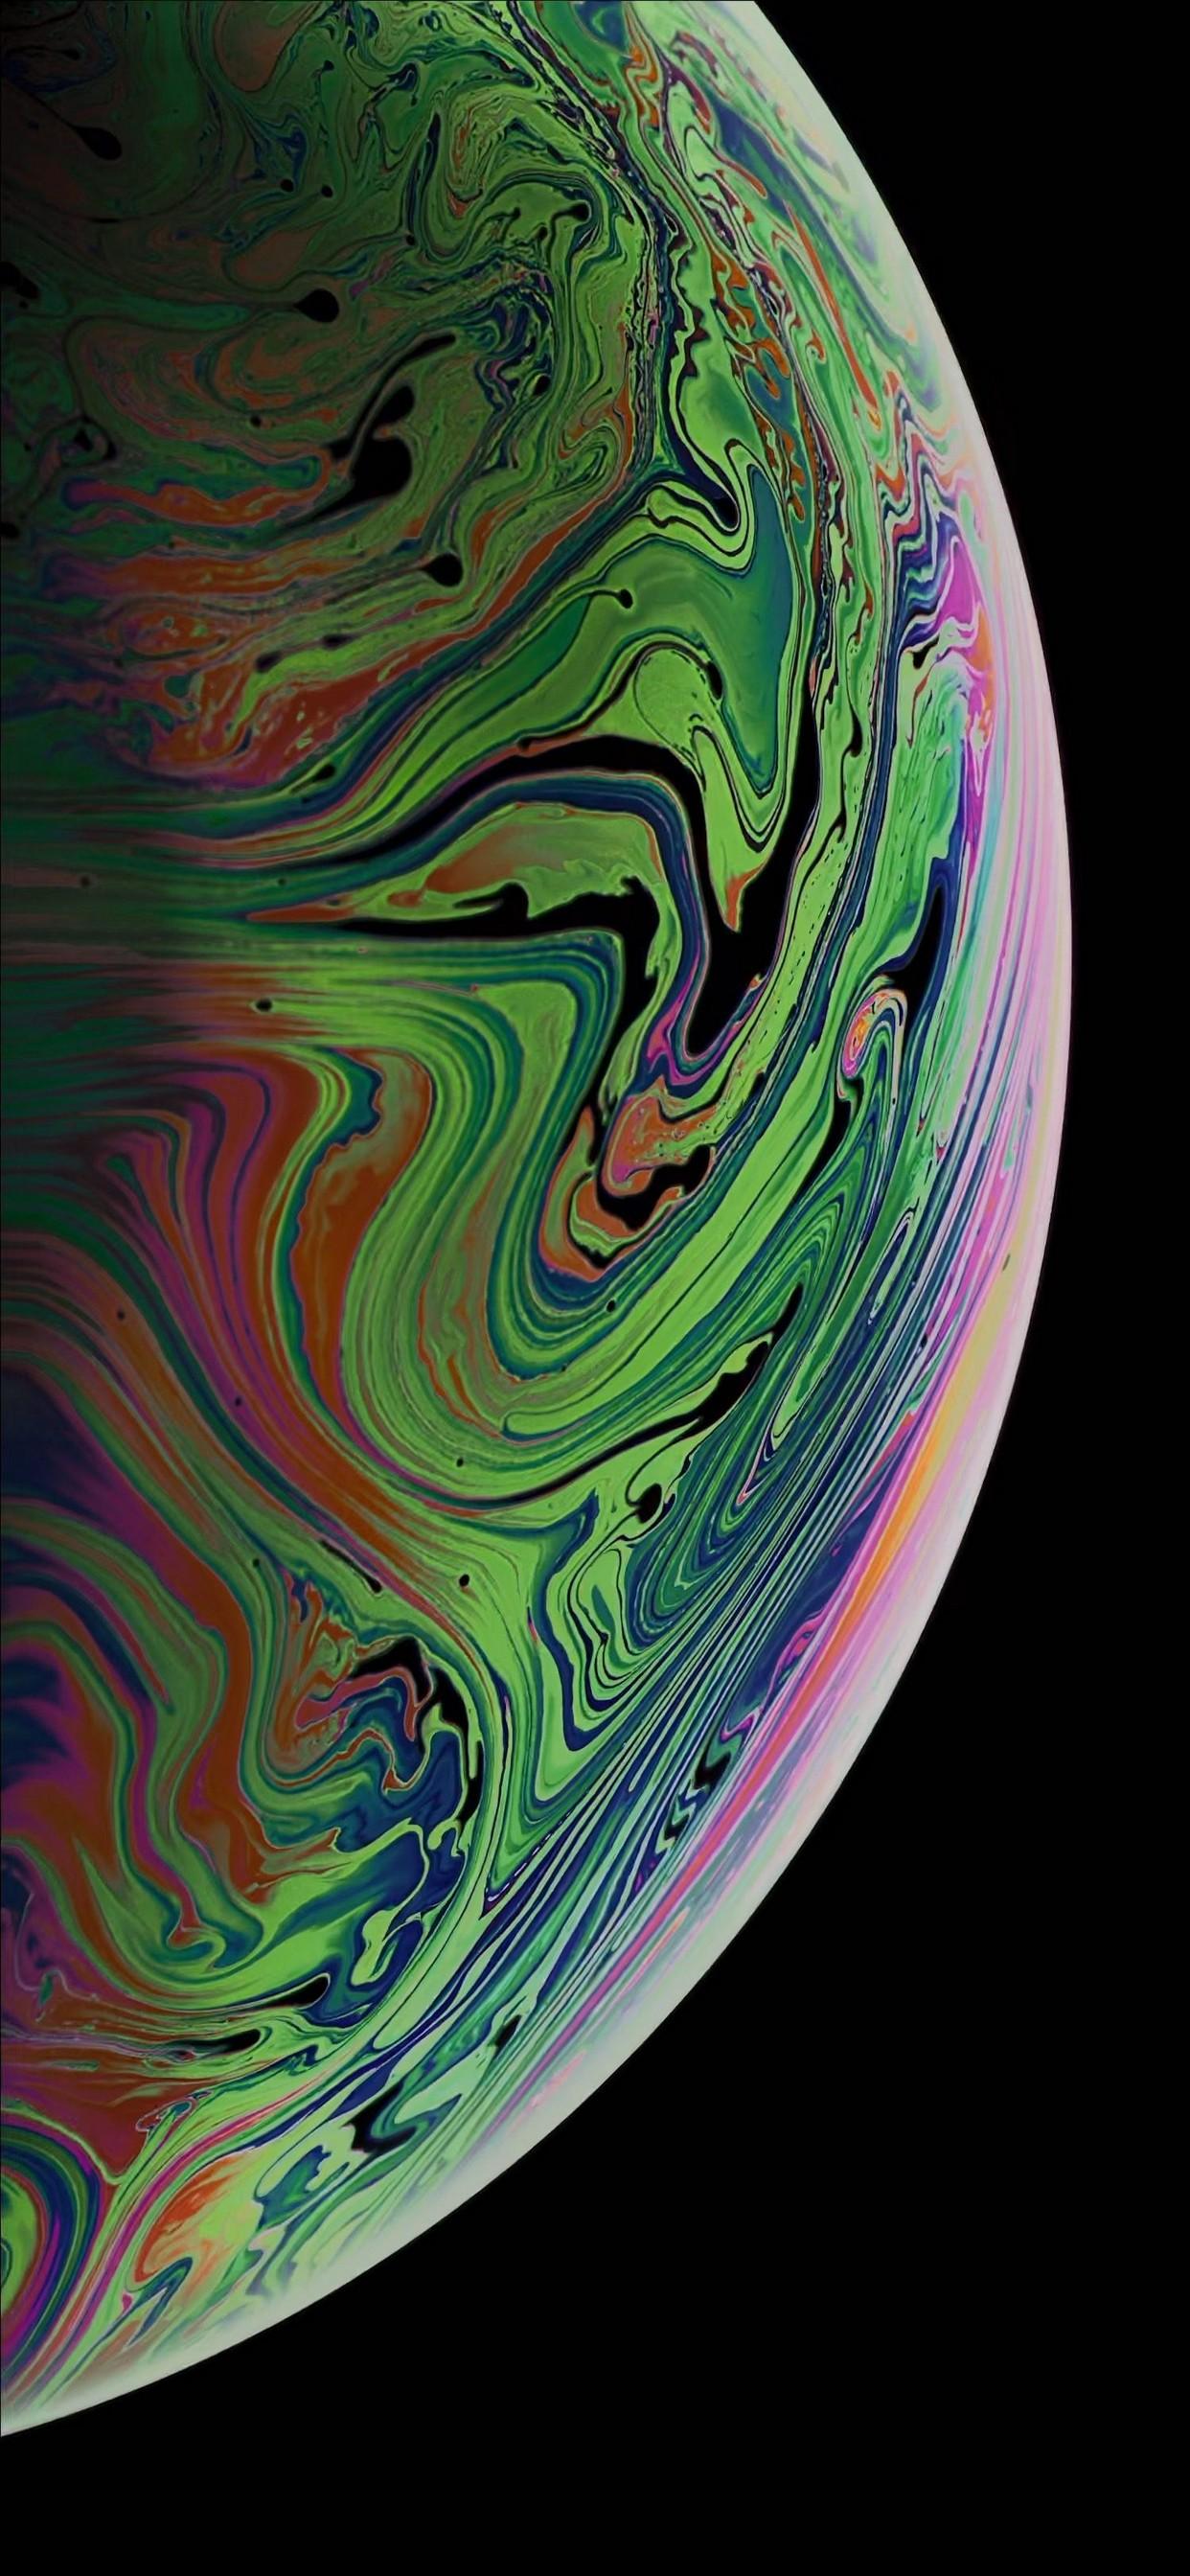 4K Ultra Hd Iphone Xs Max Wallpapers - goimages-barnacle